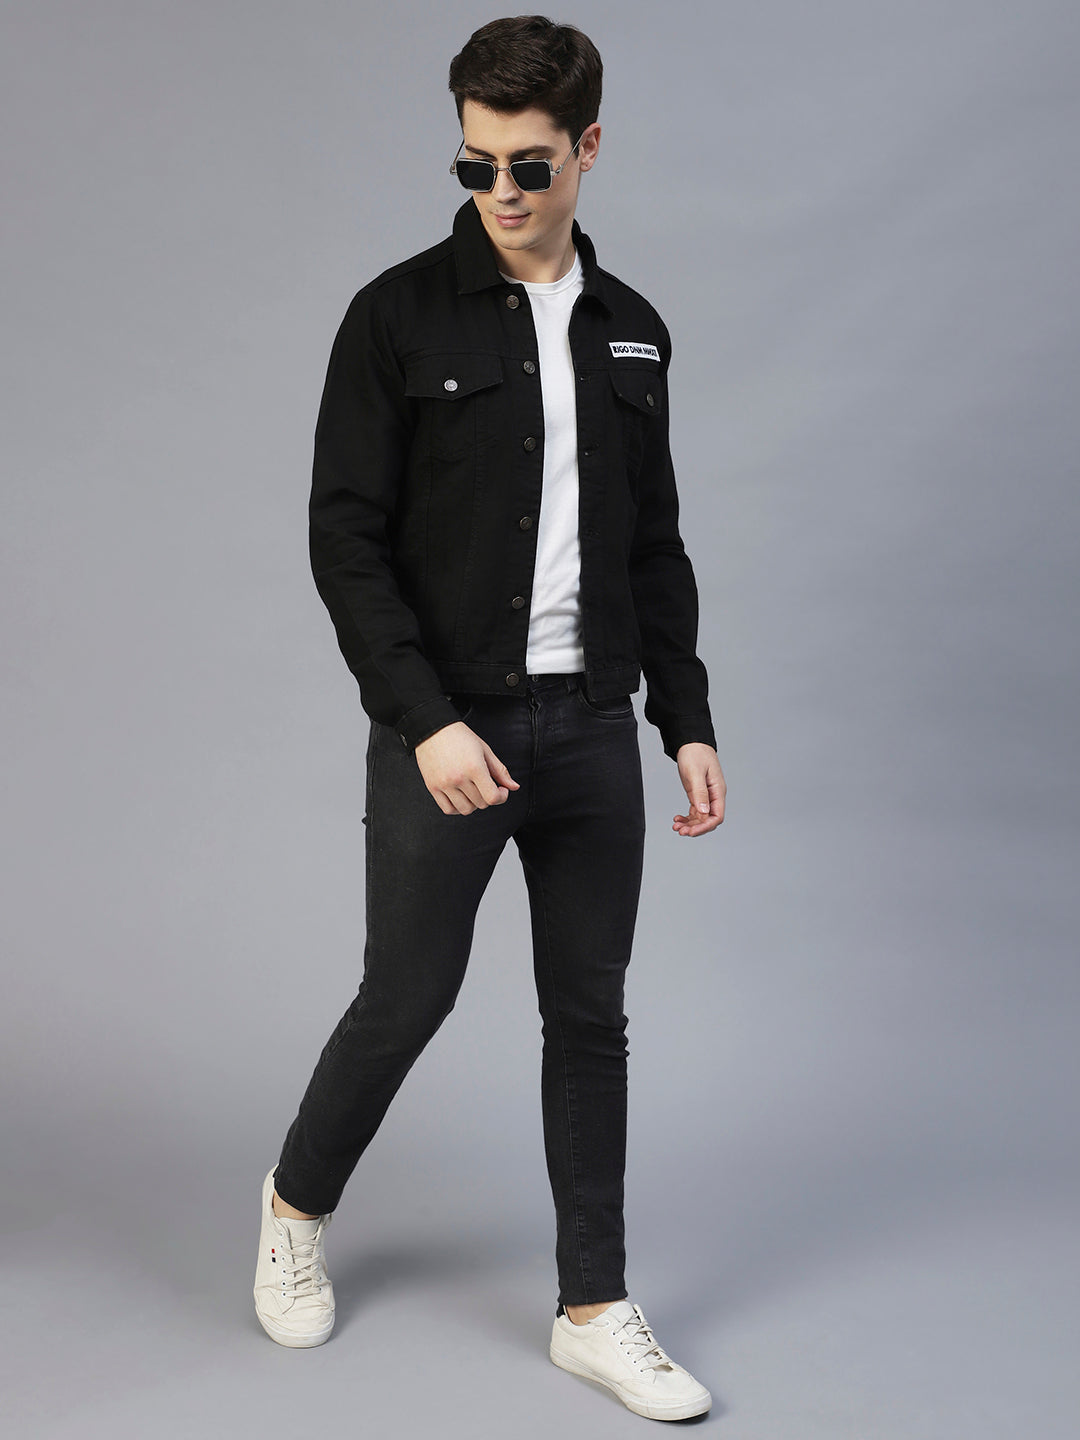 Buy Nuon Black Printed Relaxed Fit Denim Jacket from Westside